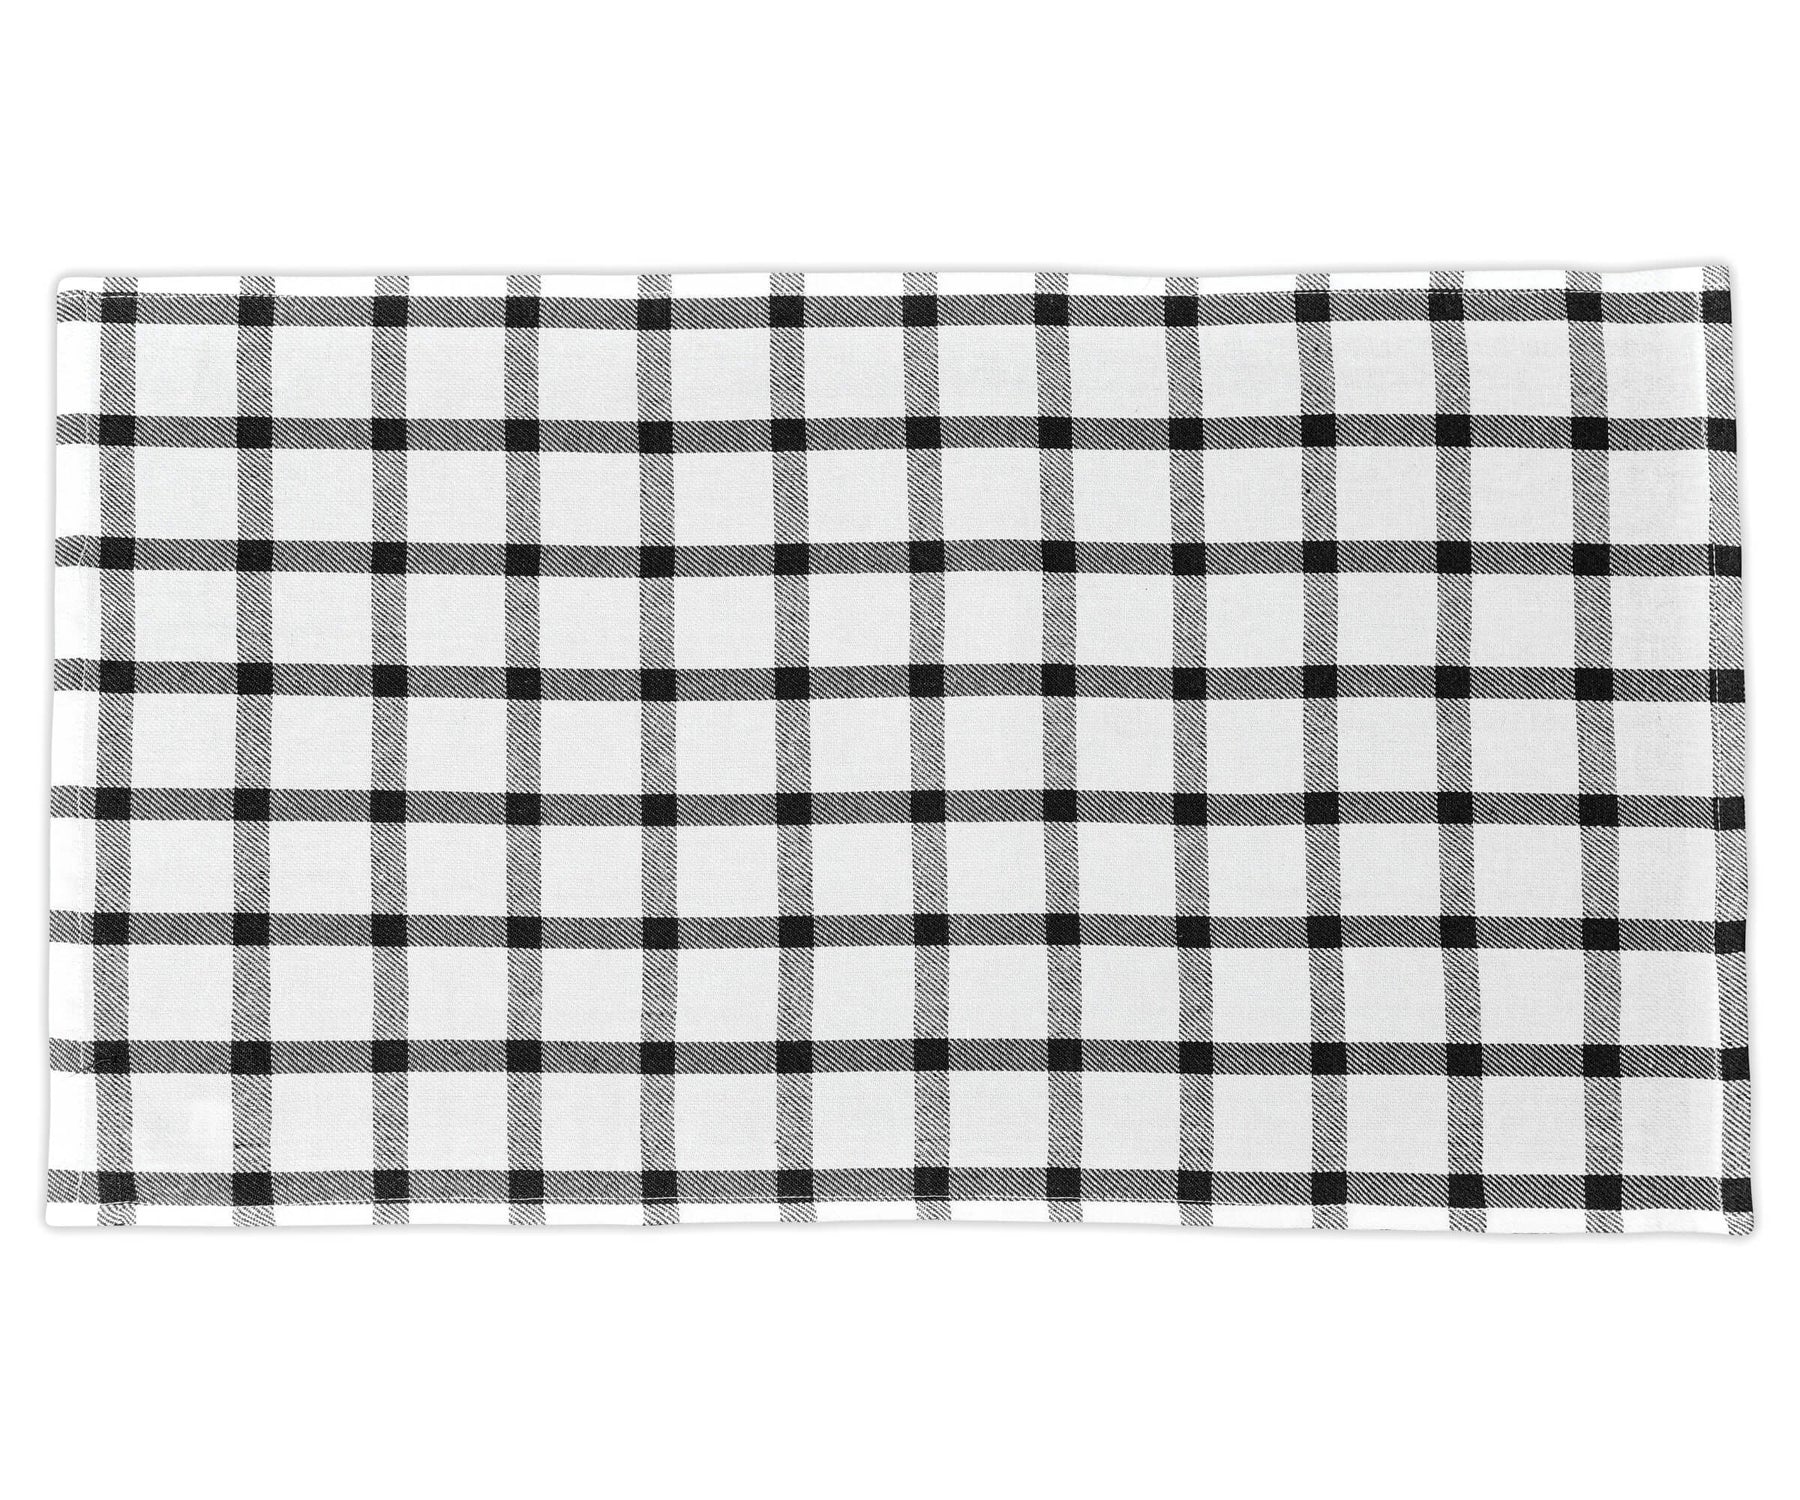 Black and white checkered patterned hand towel